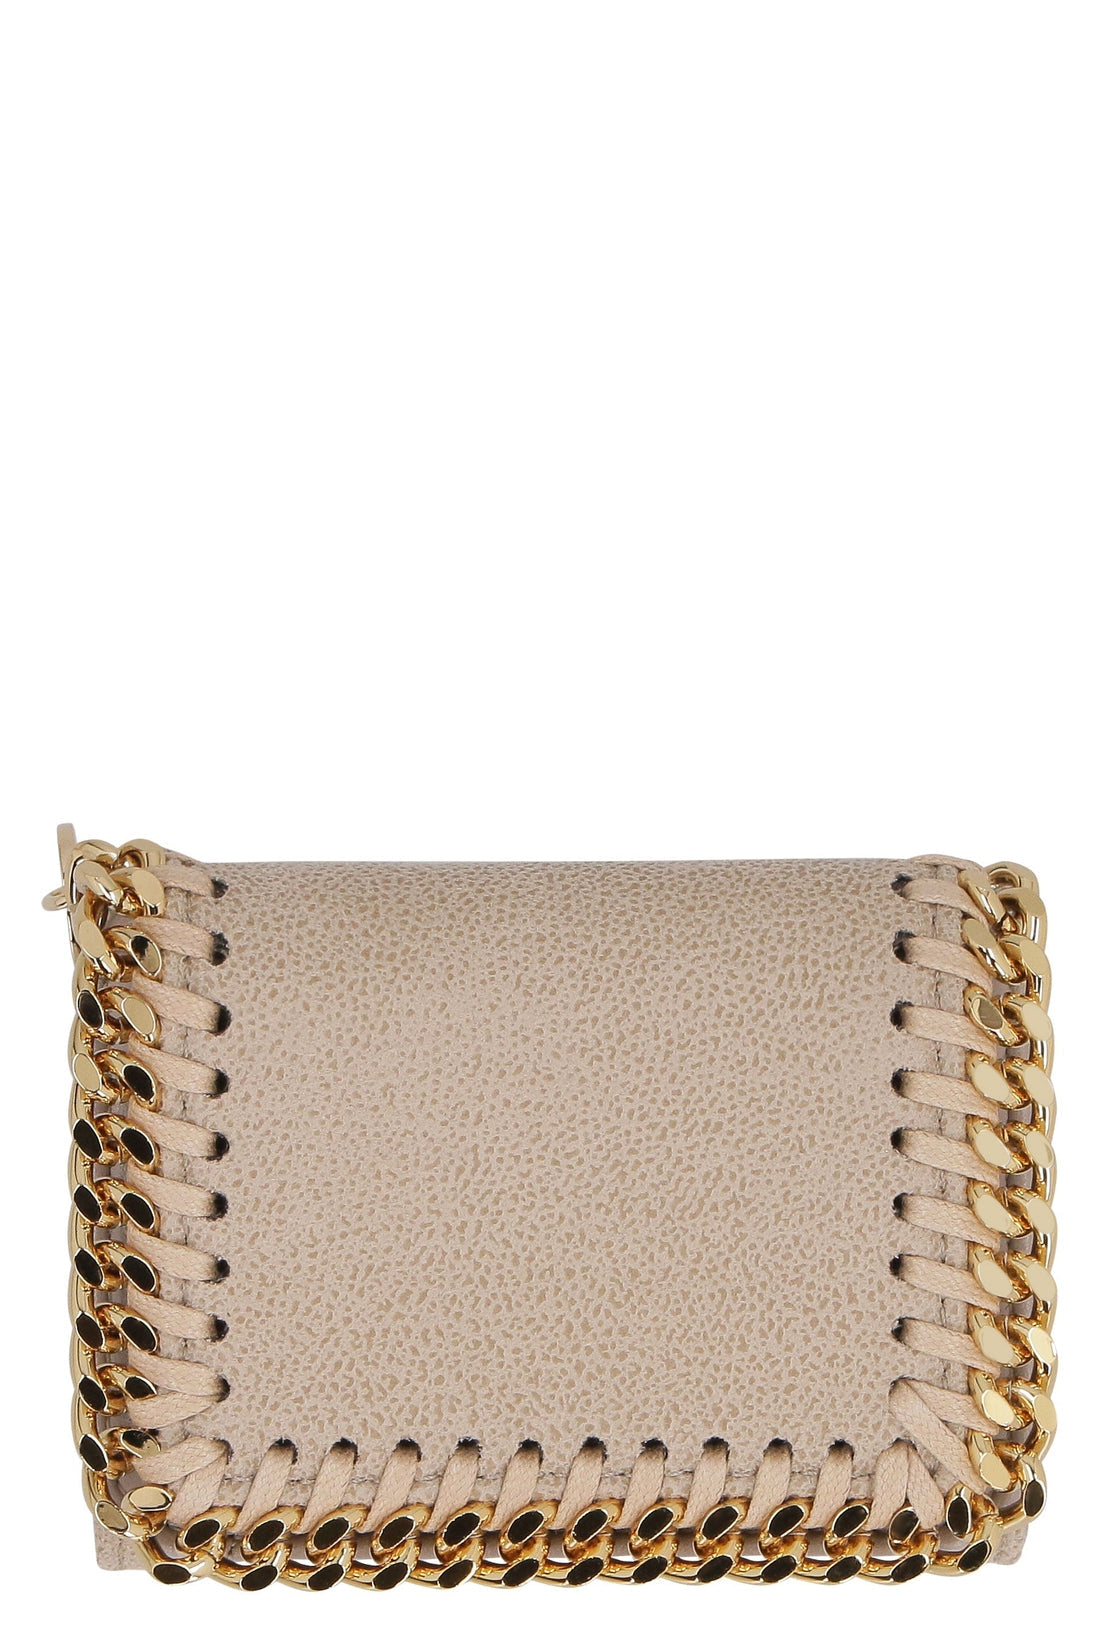 Stella McCartney-OUTLET-SALE-Falabella small wallet-ARCHIVIST